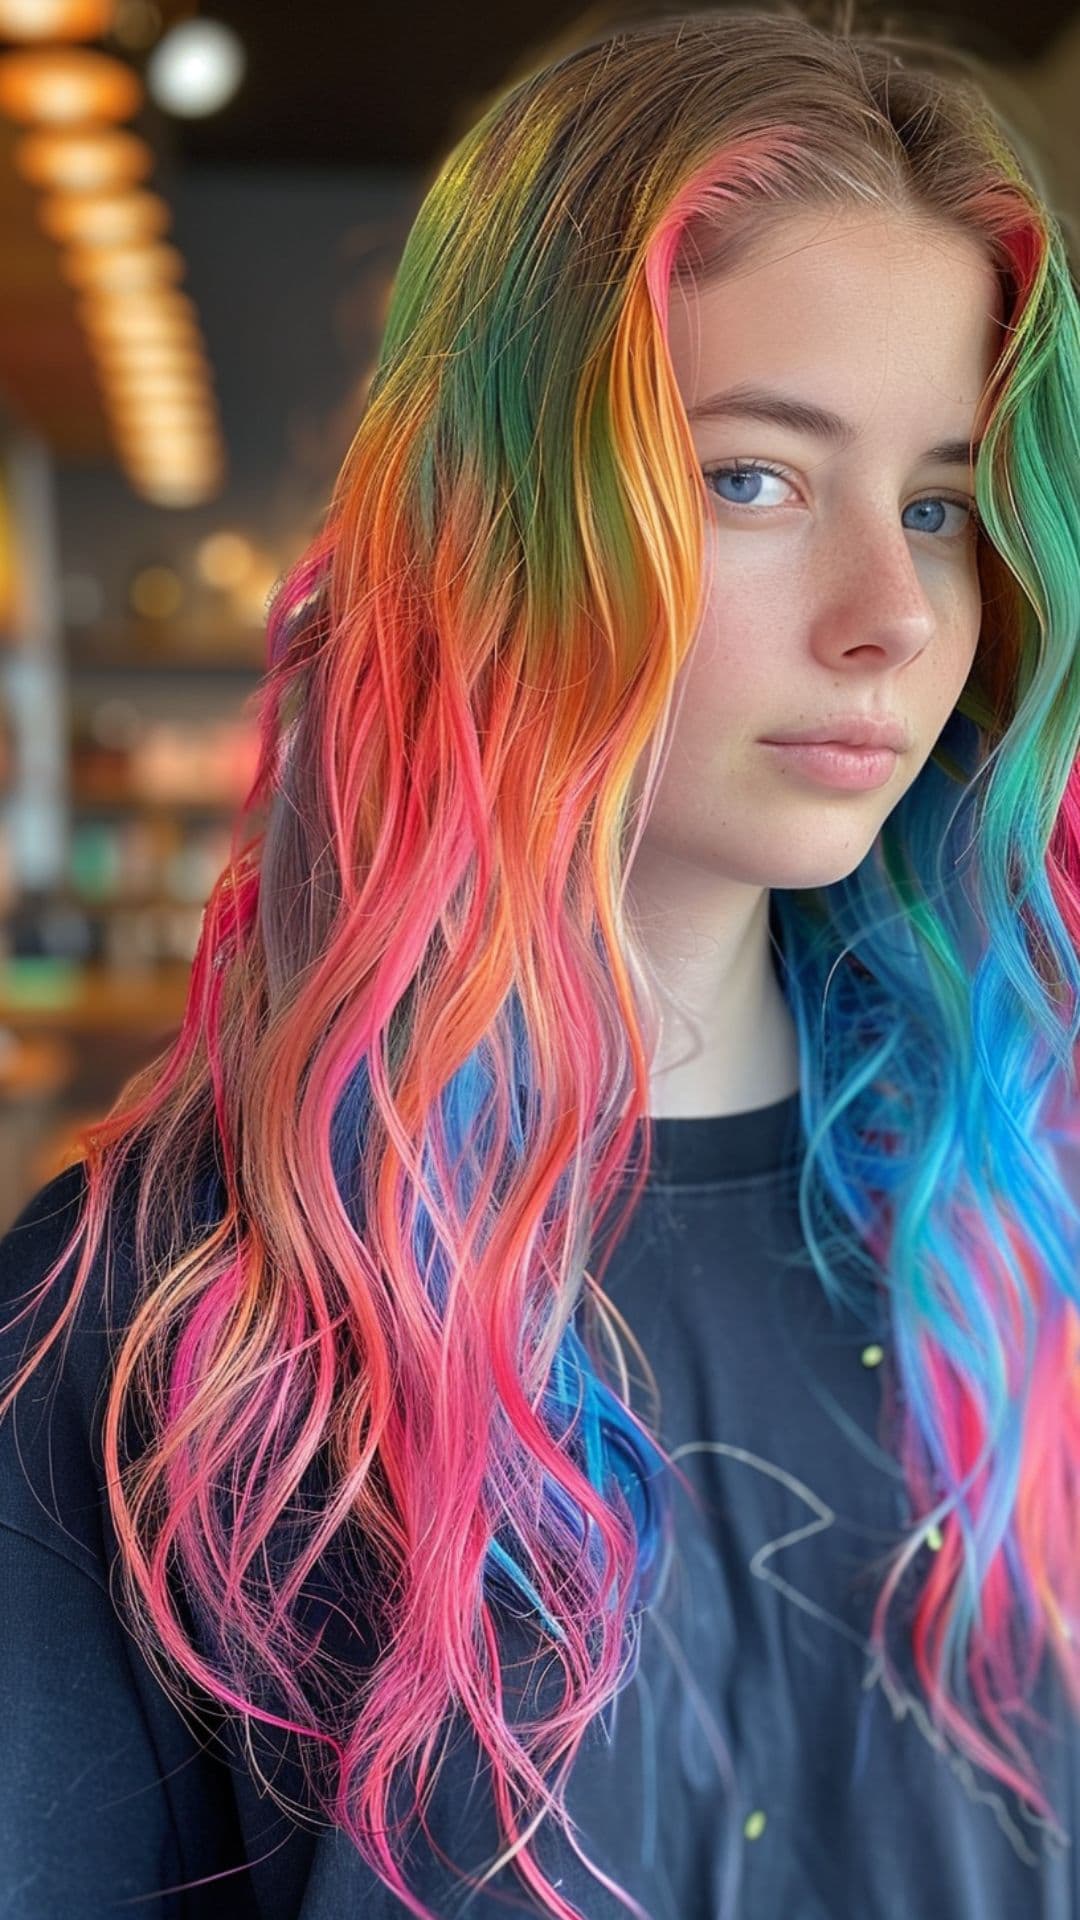 A young woman modelling a rainbow hair.